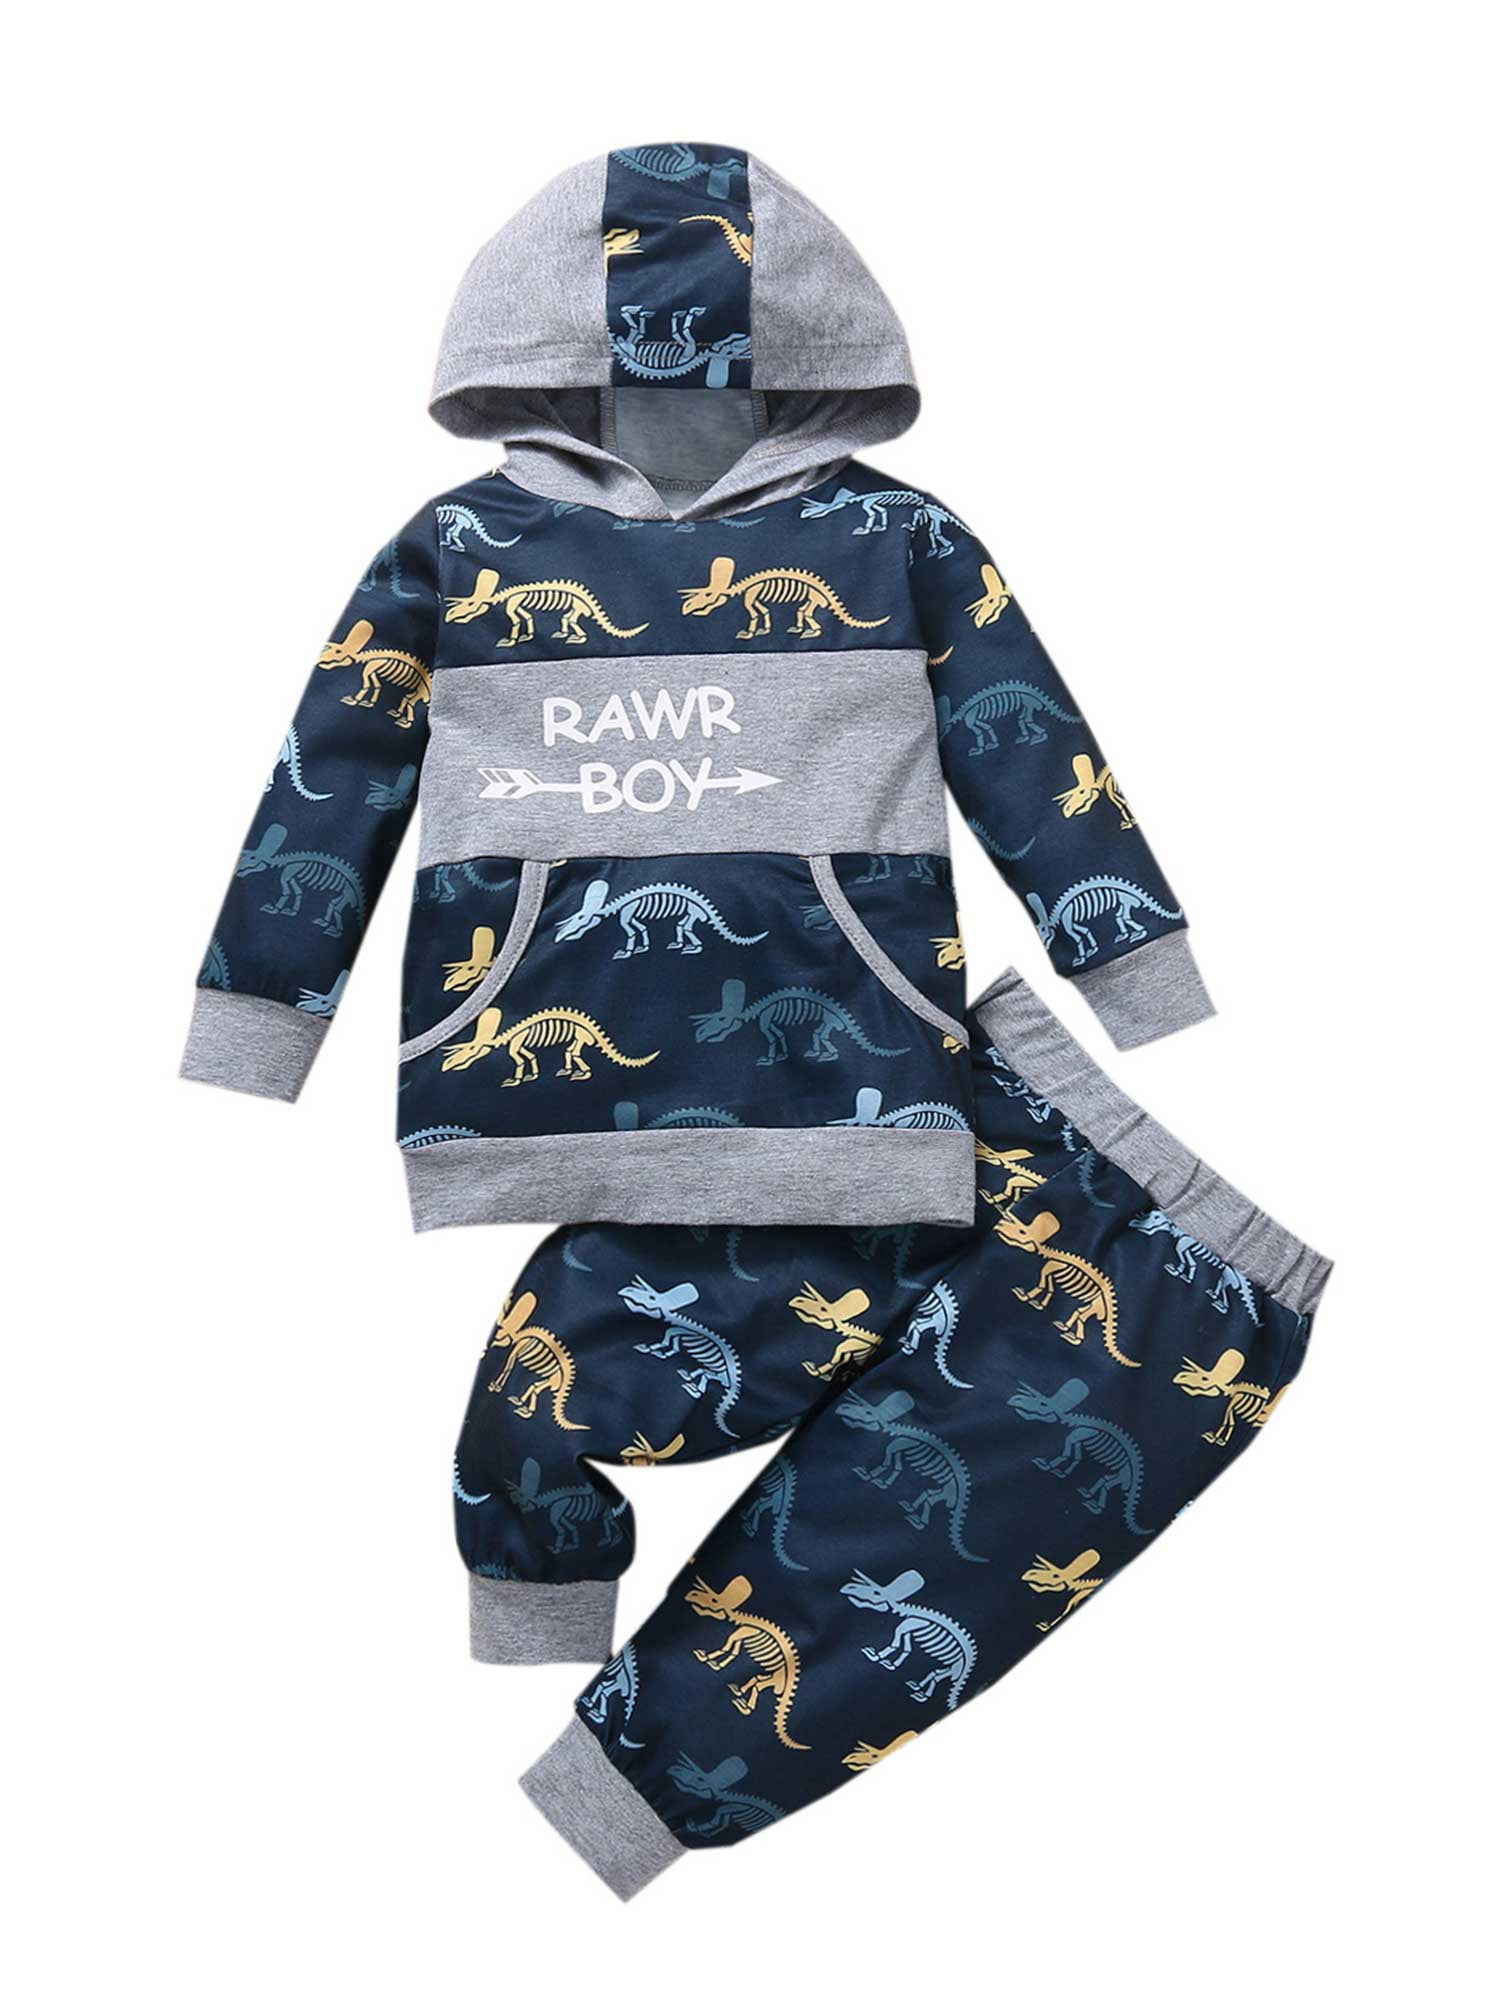 Baby Clothes 3-24 Months Boy Girls Daily Suit Hooded Sweater Tops+Pants Set